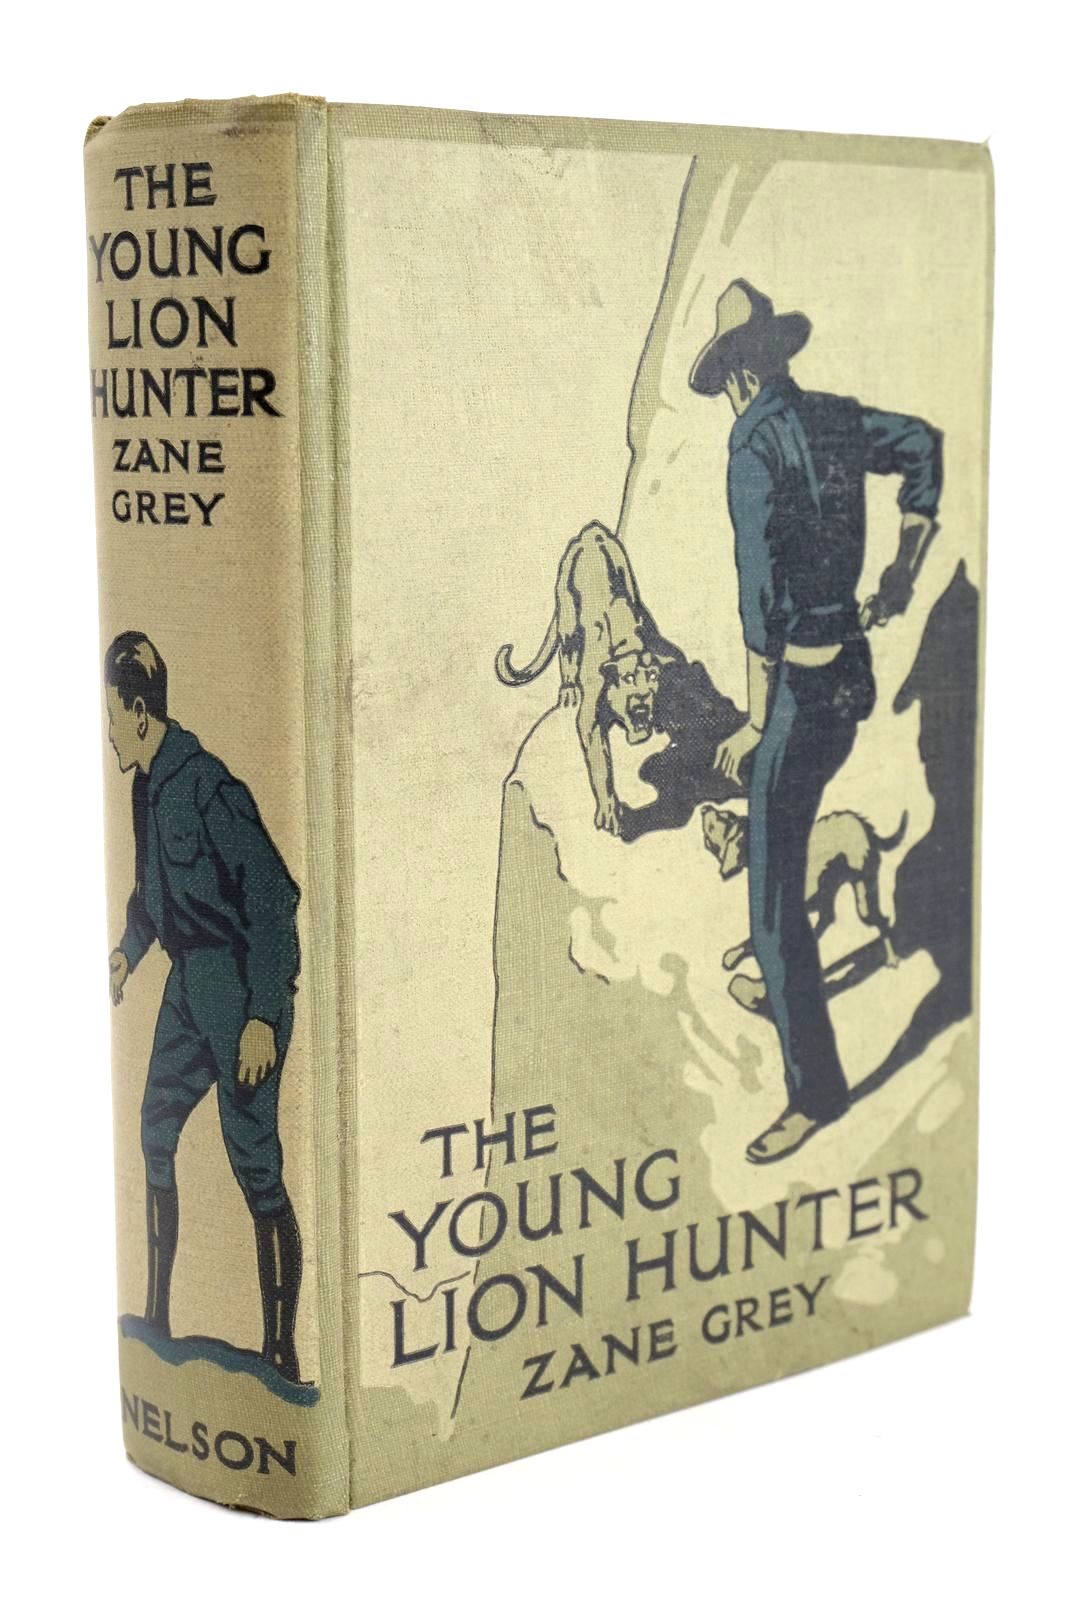 Photo of THE YOUNG LION HUNTER written by Grey, Zane published by Thomas Nelson and Sons Ltd. (STOCK CODE: 1324472)  for sale by Stella & Rose's Books